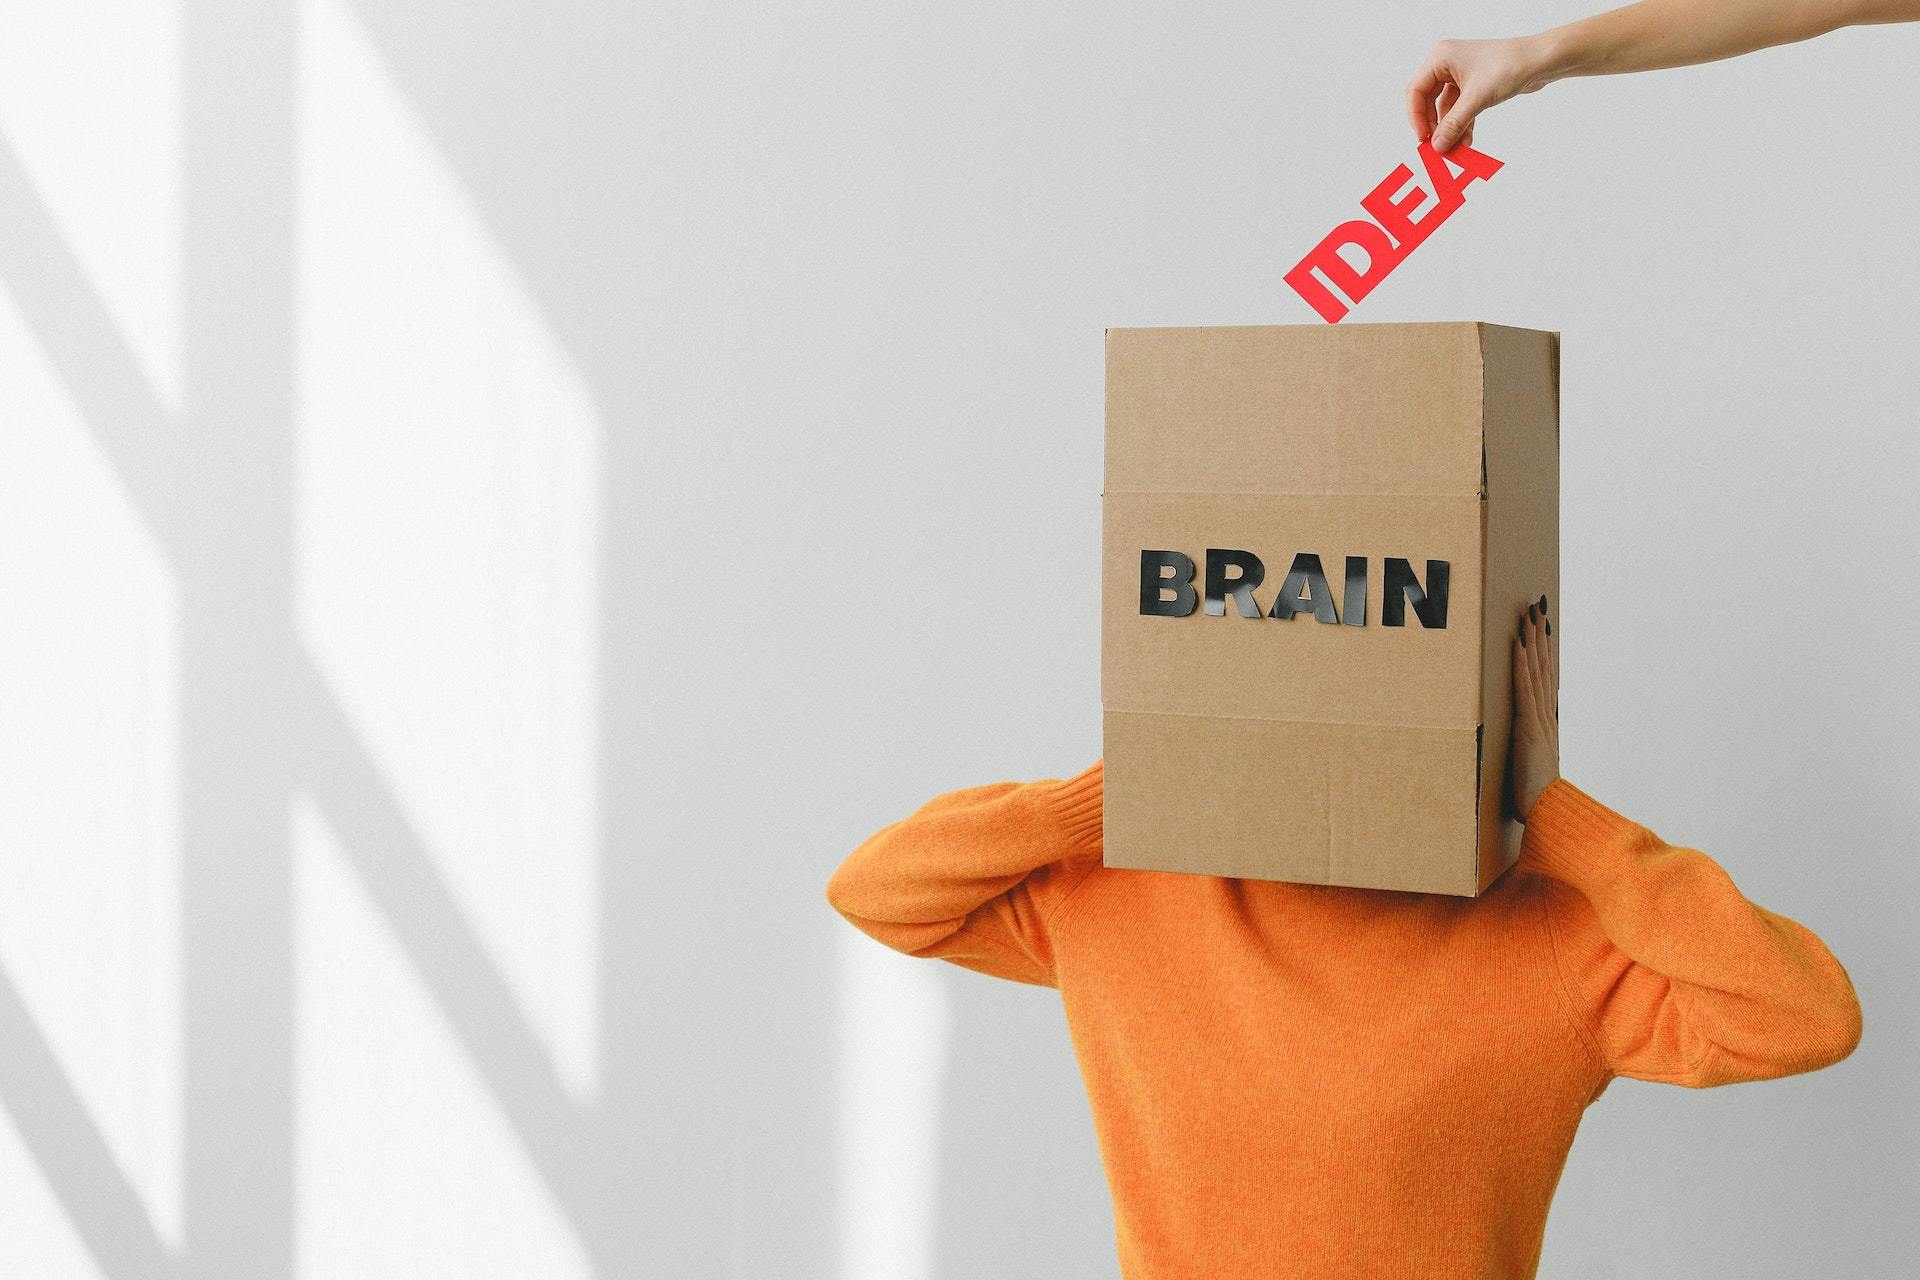 Person with a box (with "BRAIN" written on it) as a head and someone taking the letters "IDEA"  out of the box